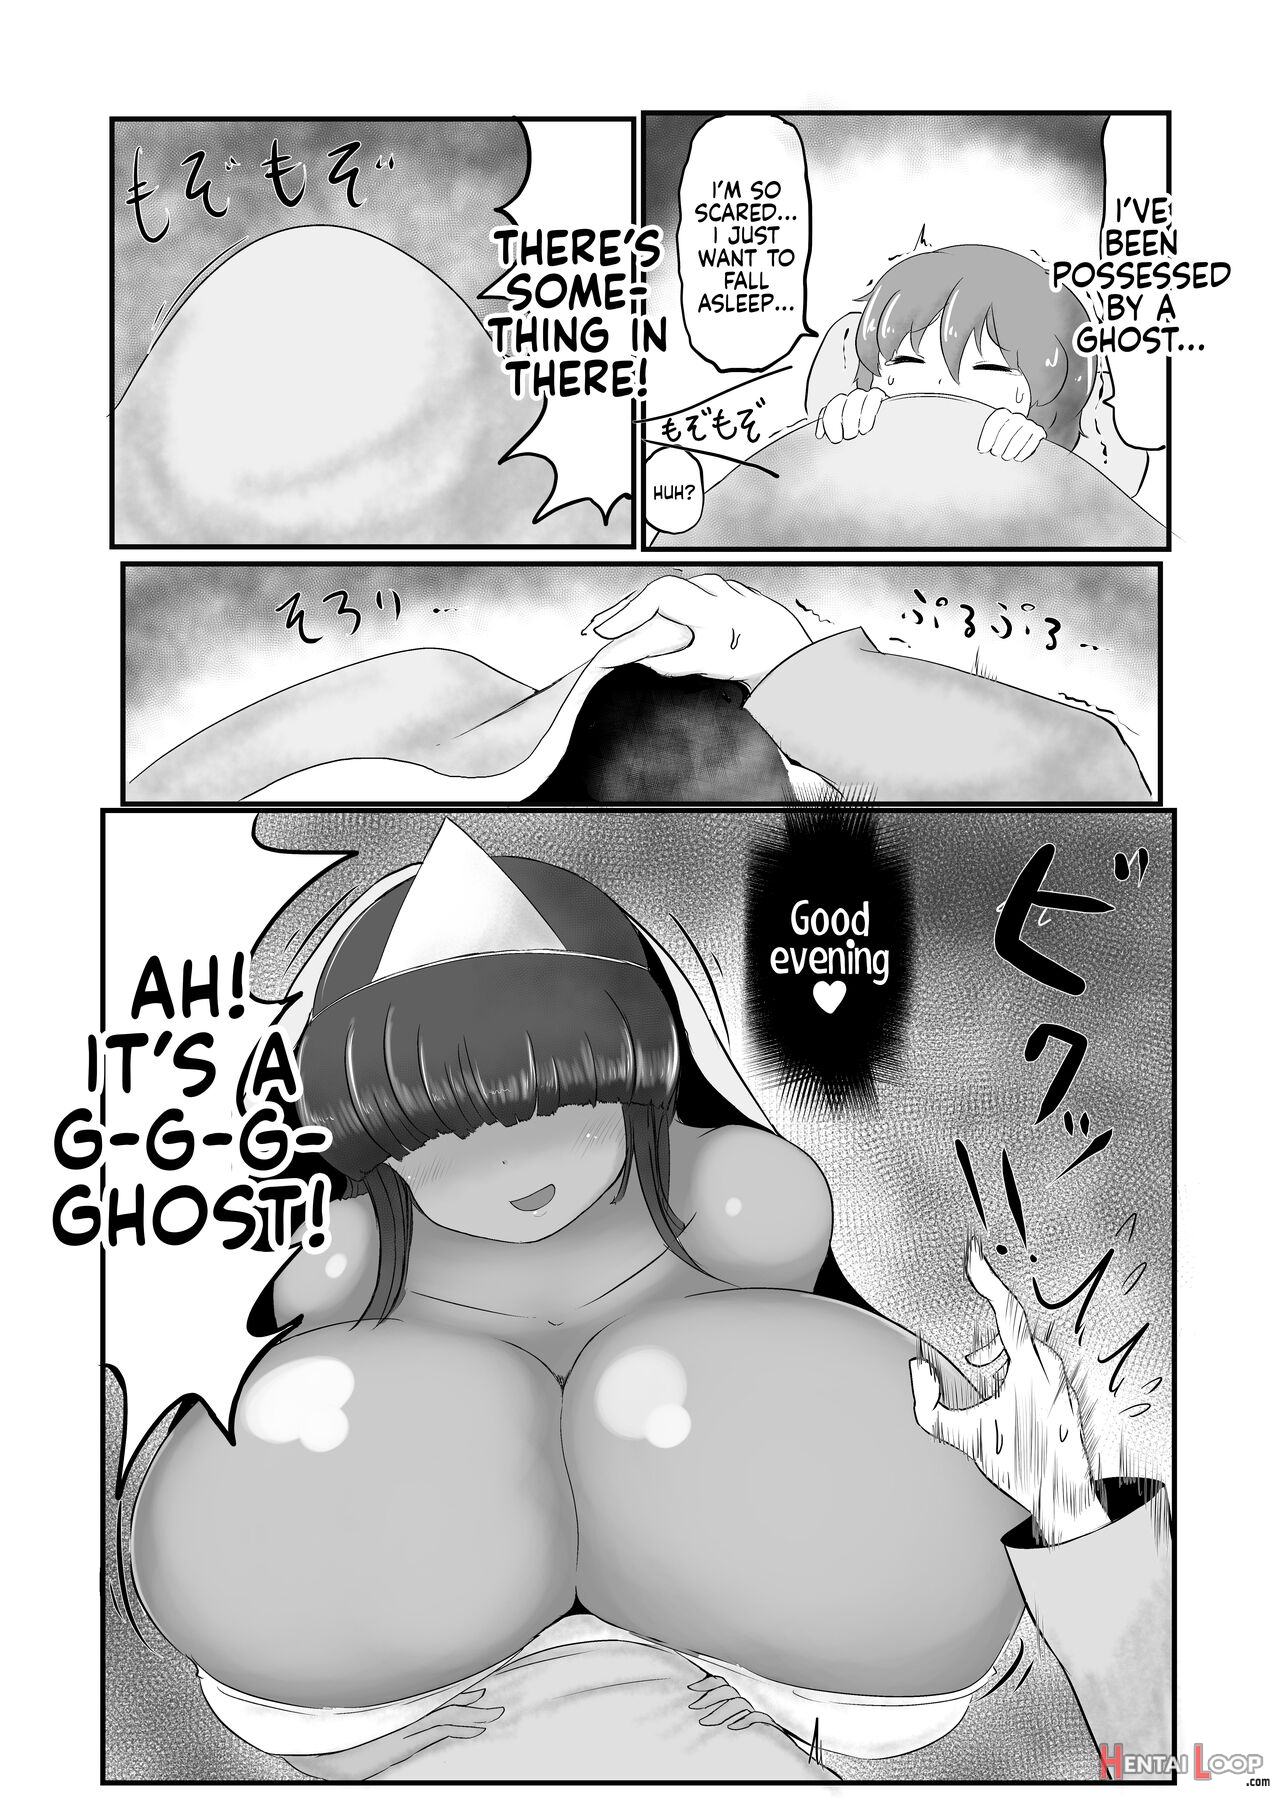 Eaten By A Ghost page 5